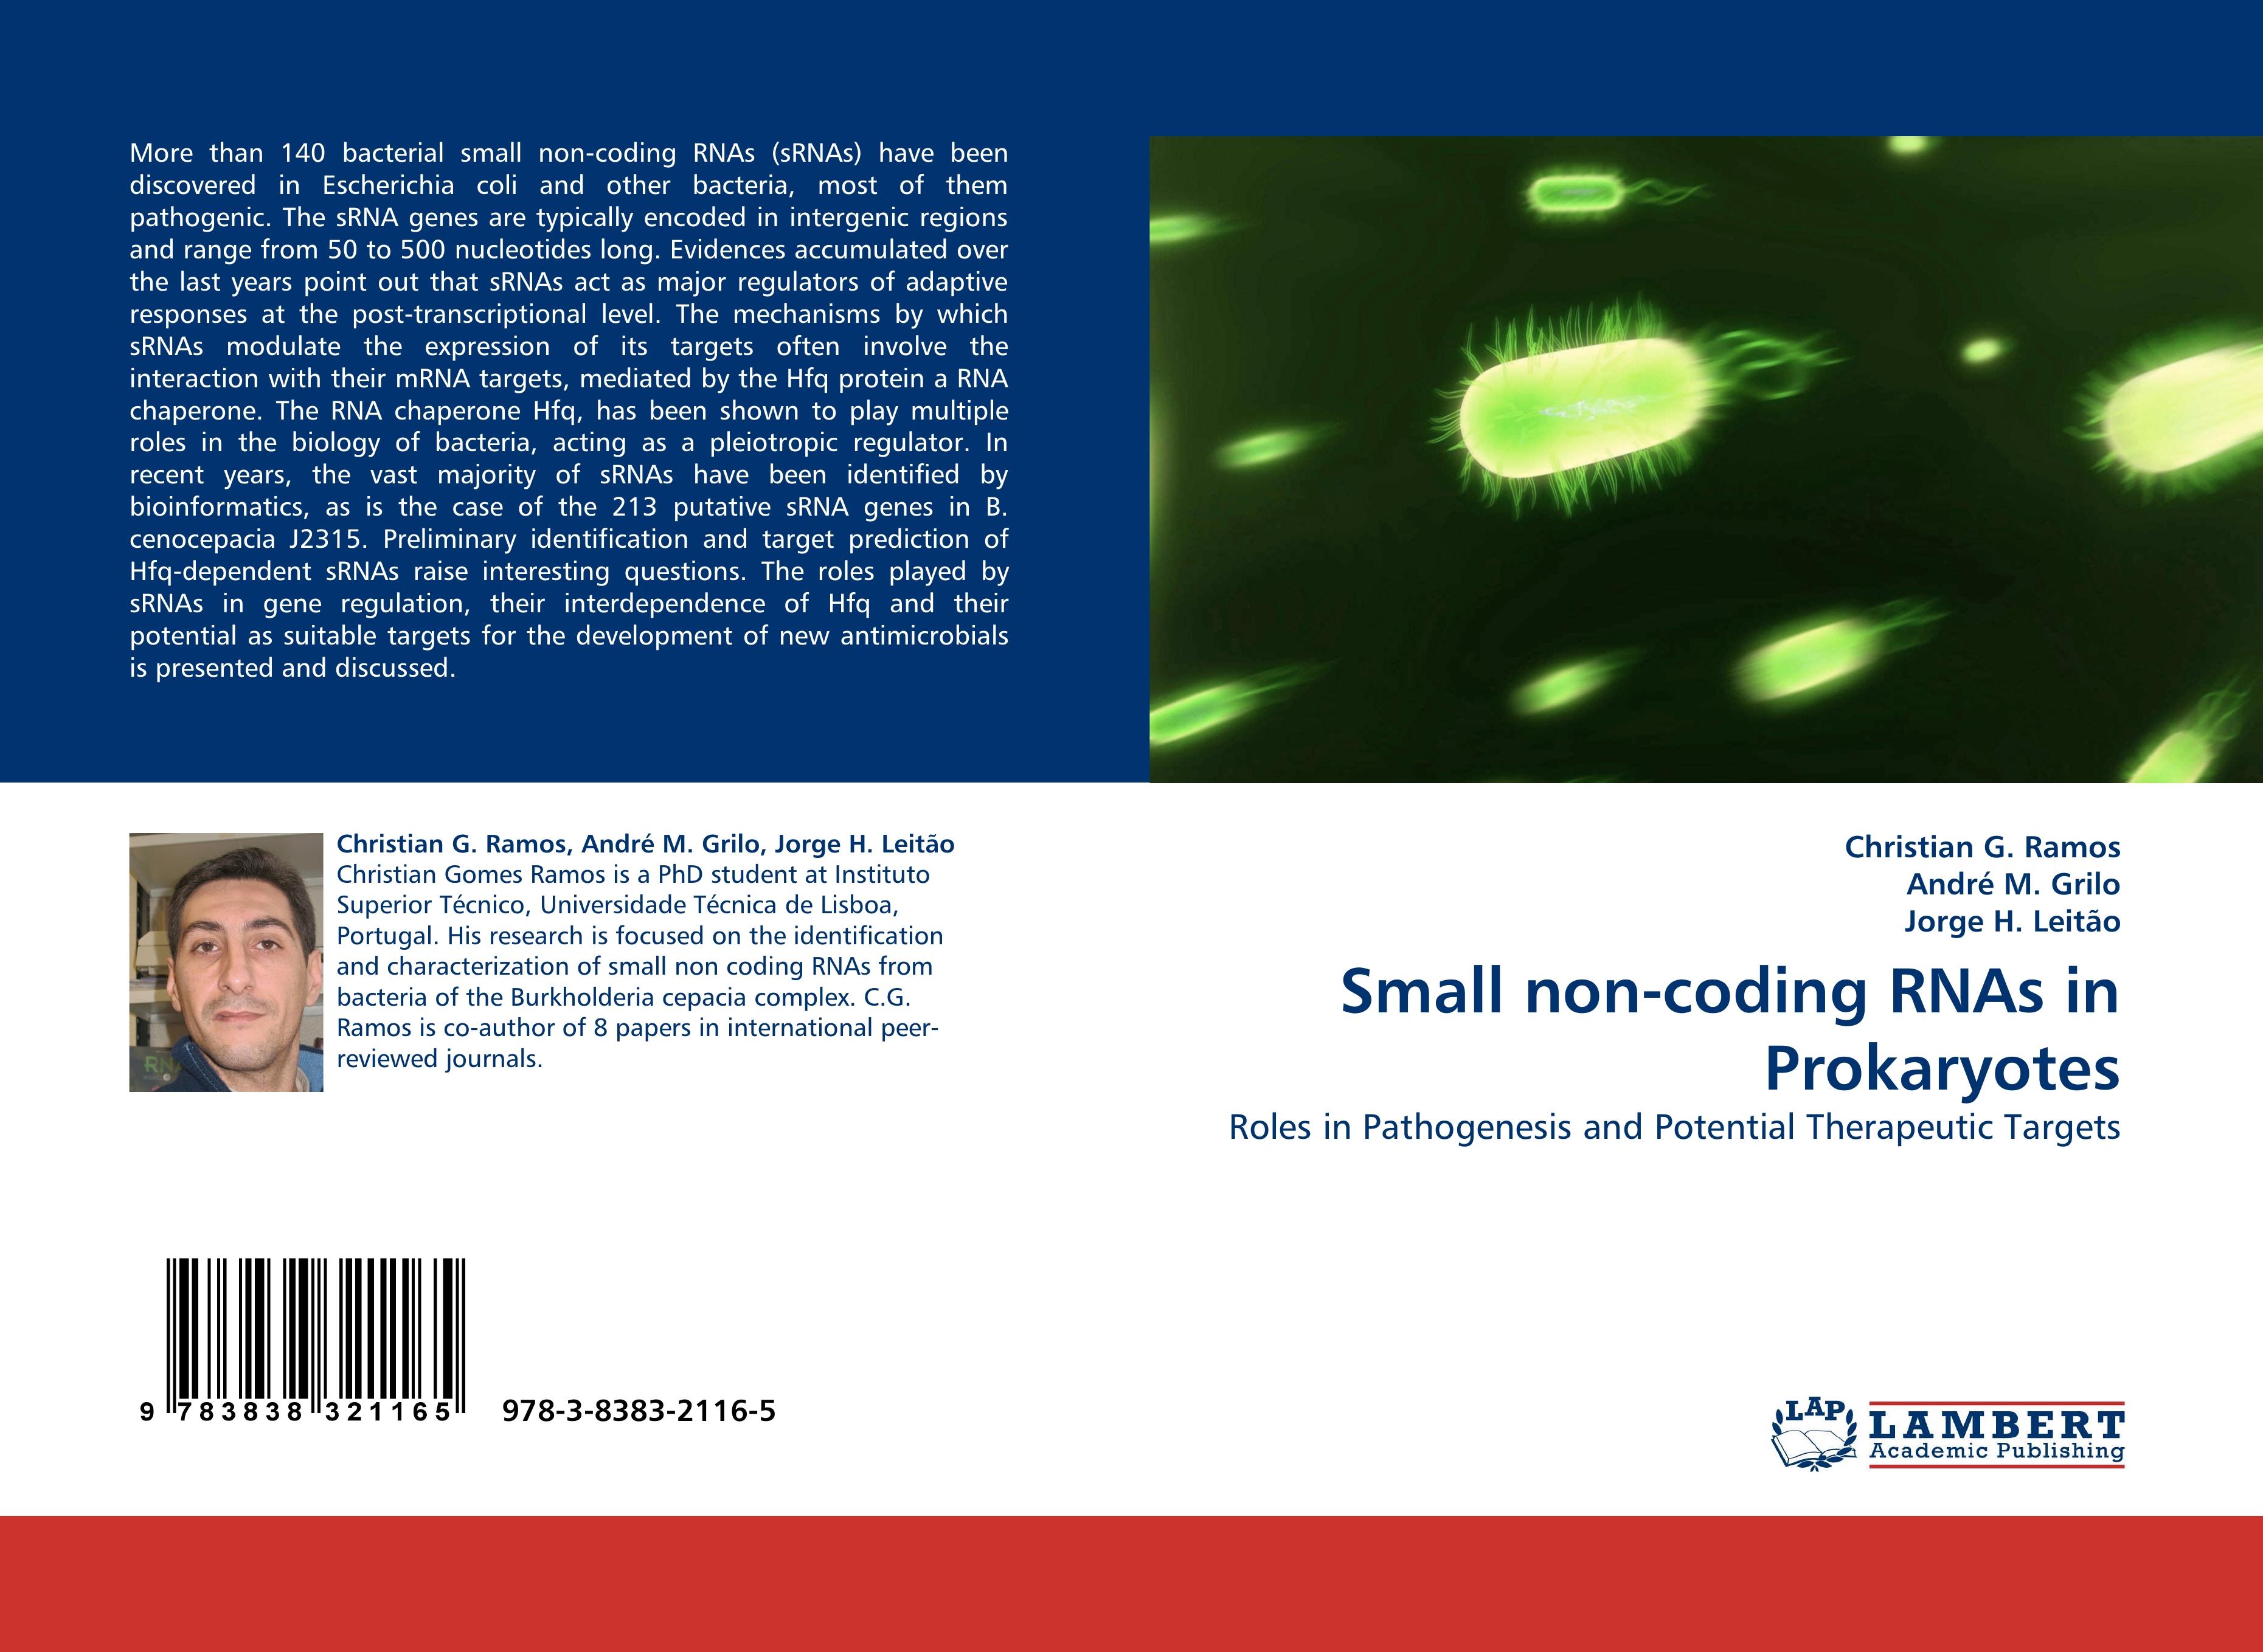 Small non-coding RNAs in Prokaryotes | Roles in Pathogenesis and Potential Therapeutic Targets | Christian G. Ramos (u. a.) | Taschenbuch | Paperback | 84 S. | Englisch | 2010 | EAN 9783838321165 - Ramos, Christian G.